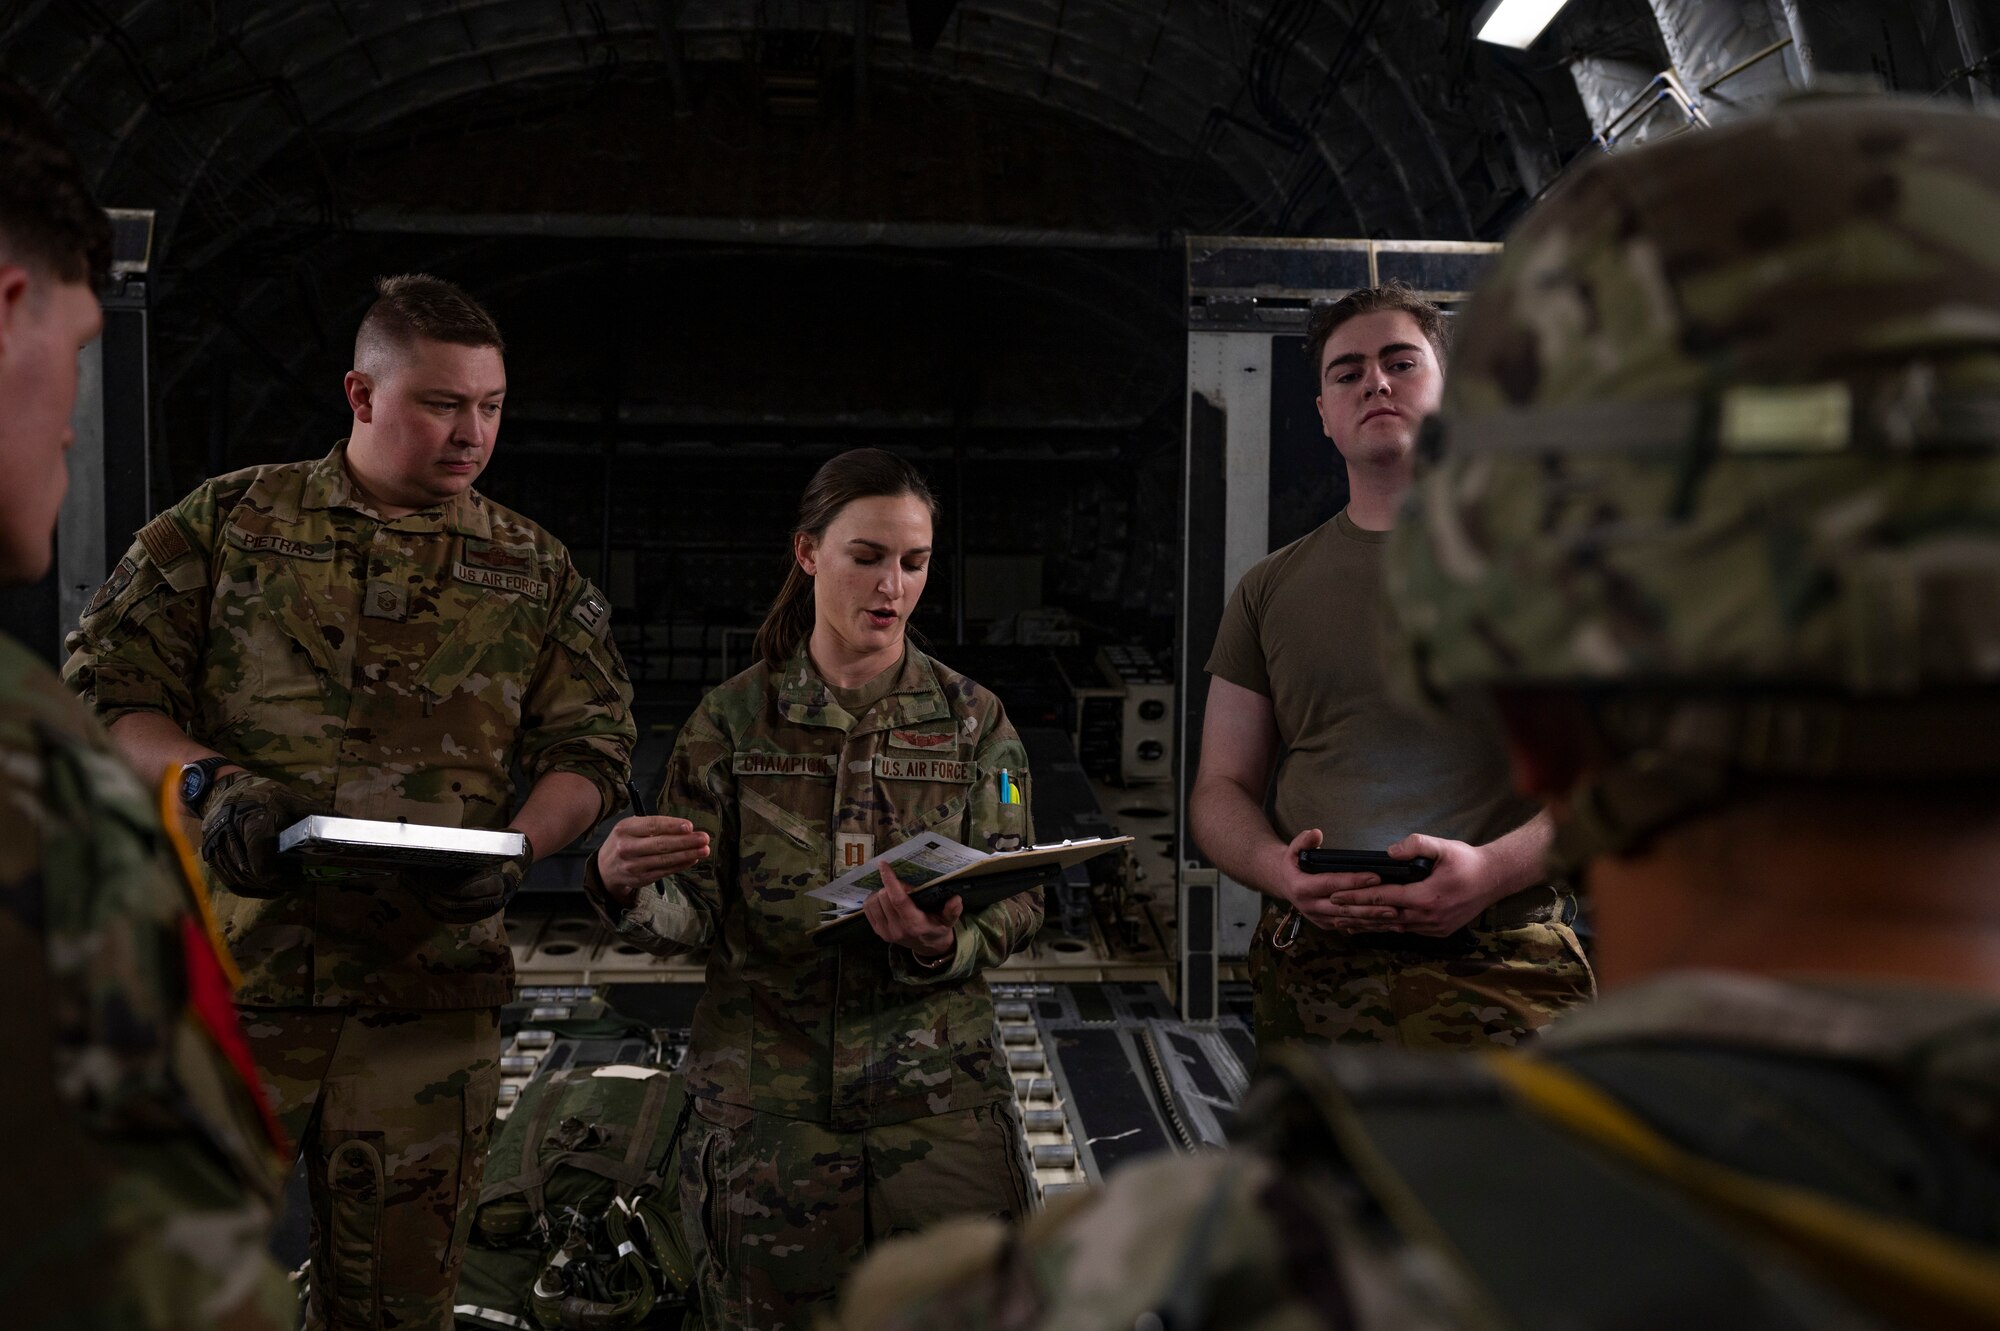 U.S. Air Force Capt. Carol Champion, center, a pilot with the 16th Airlift Squadron, briefs U.S. Army jumpmasters assigned to the 82nd Airborne Division, Fort Bragg, North Carolina, during Battalion Mass Tactical Week at Pope Army Airfield, North Carolina, Feb. 4, 2022. BMTW is a joint exercise between the U.S. Air Force and the U.S. Army, which gives participants the ability to practice contingency operations in a controlled environment. (U.S. Air Force photo by Airman 1st Class Charles Casner)